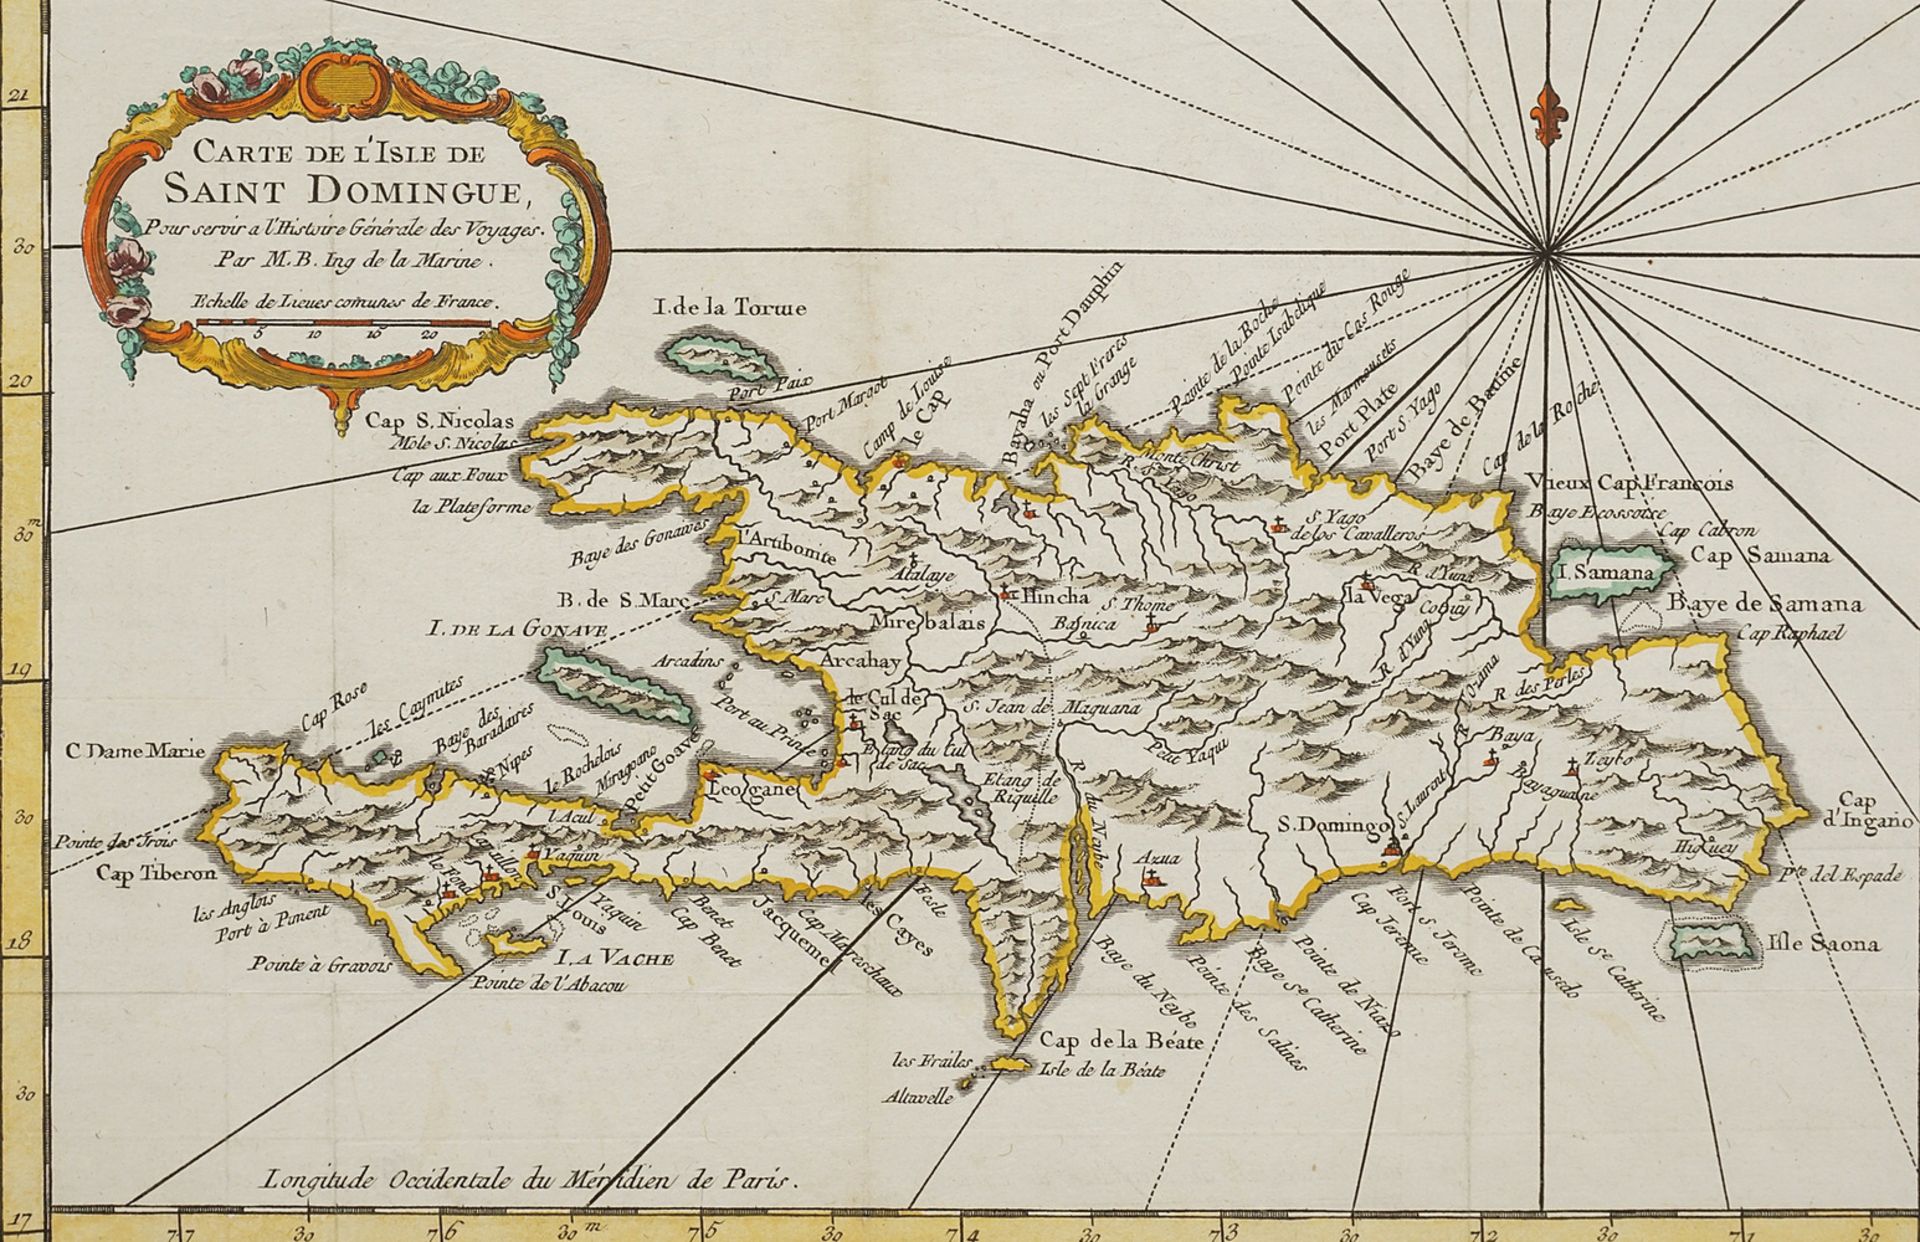 Map of the island of Saint Domingue